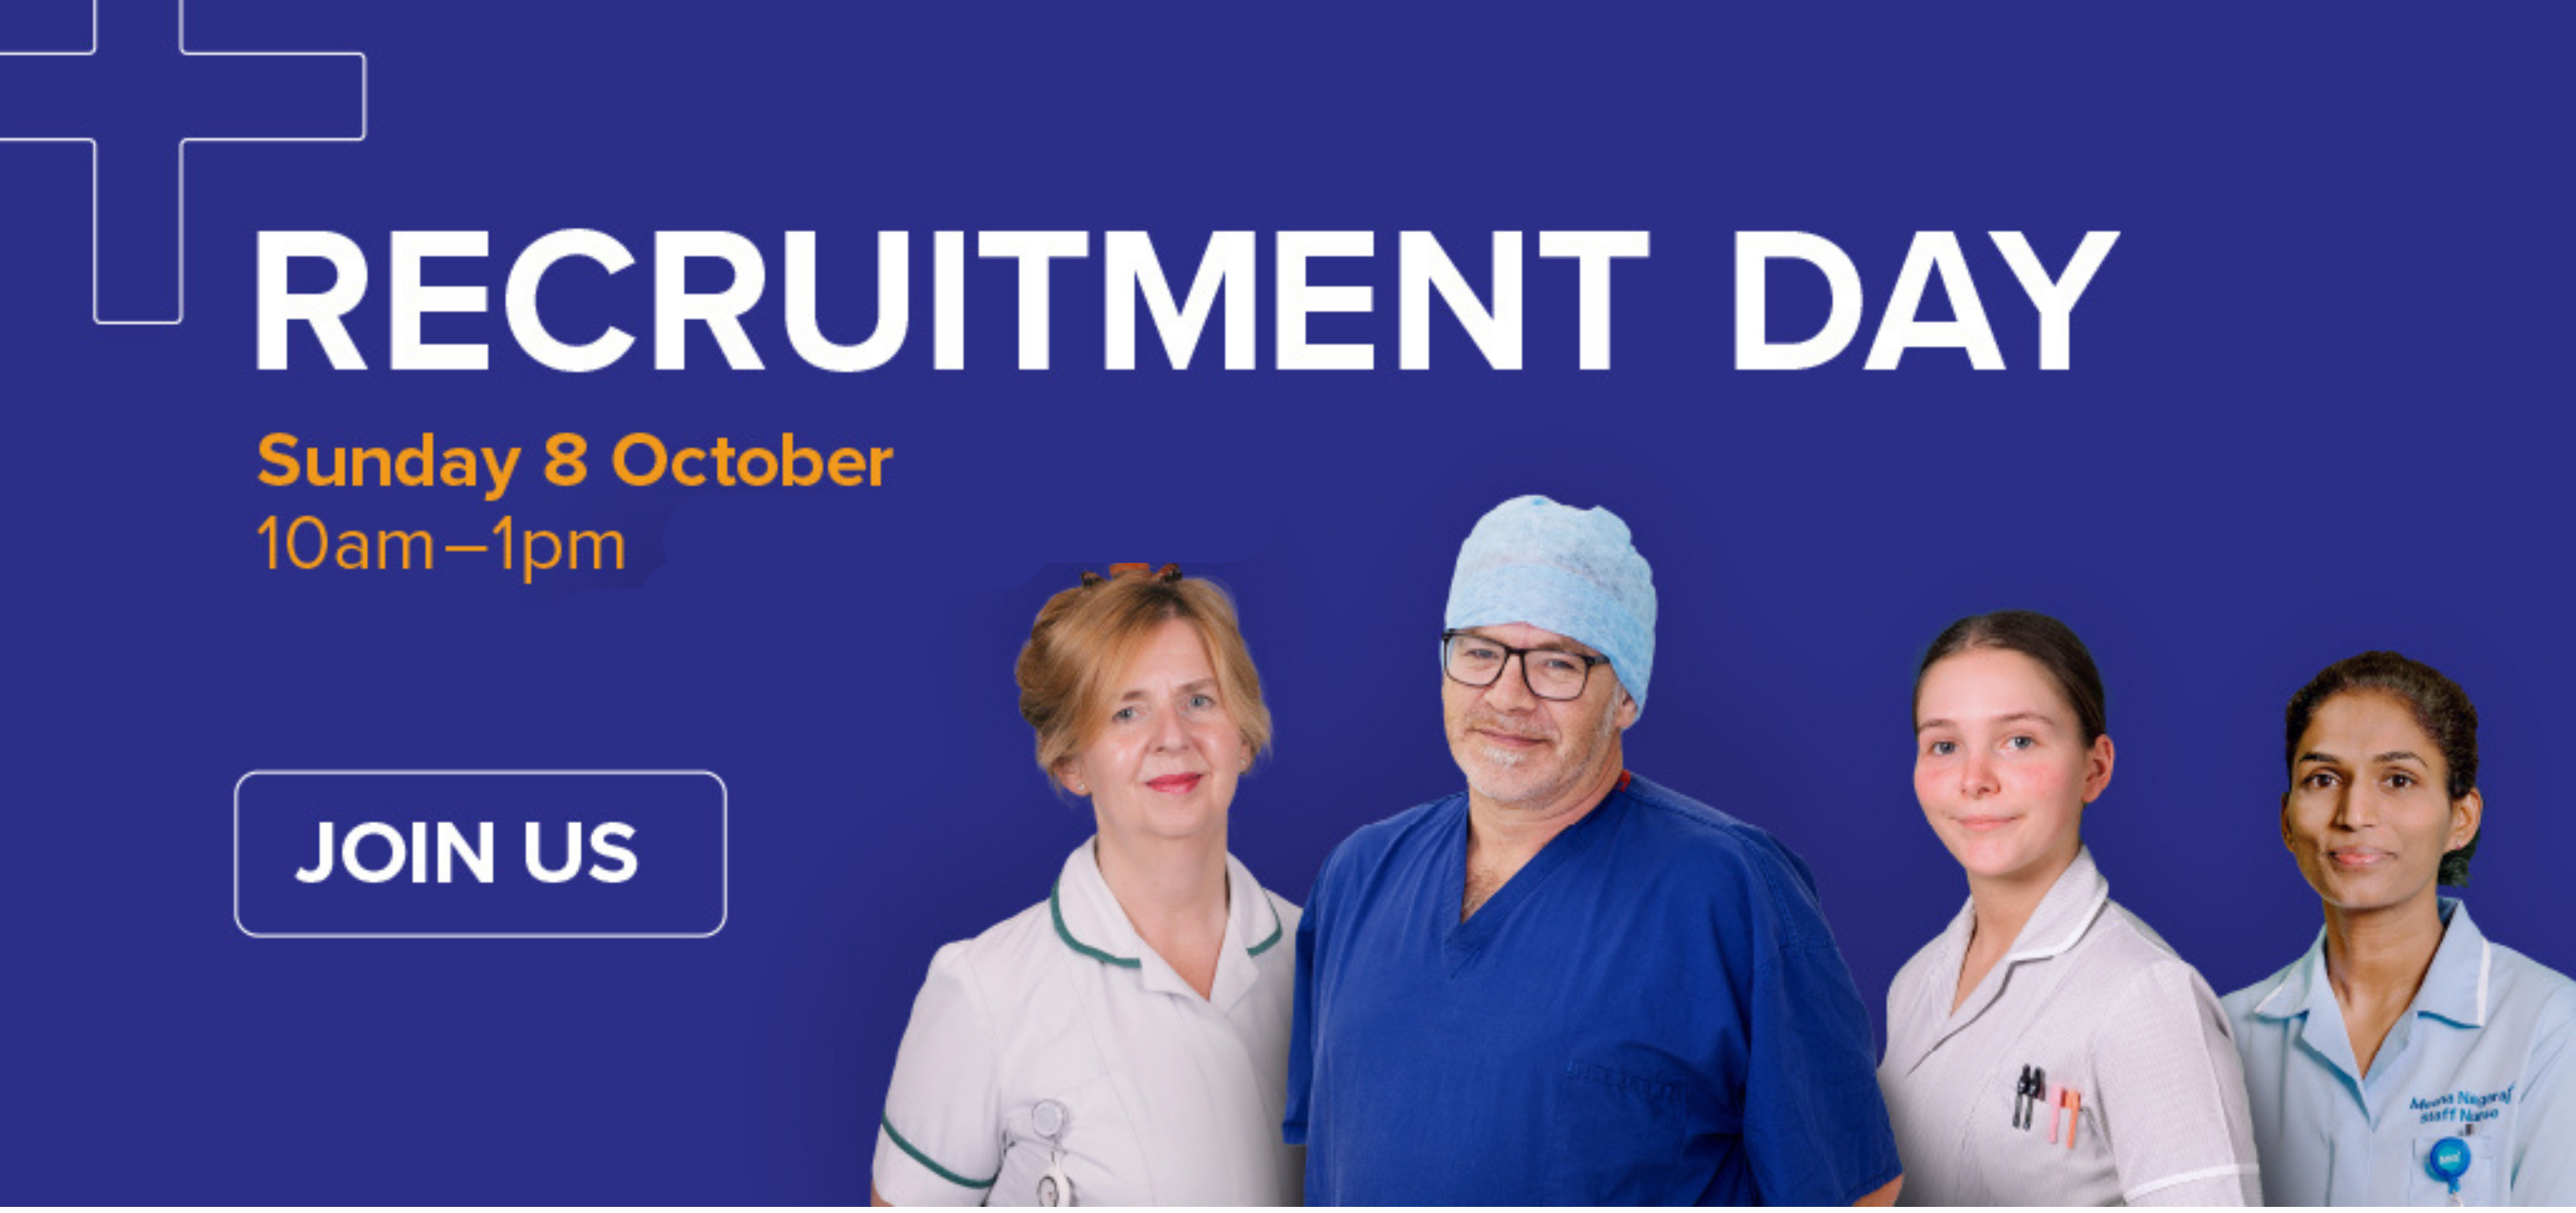 Recruitment Day Graphic Website Size